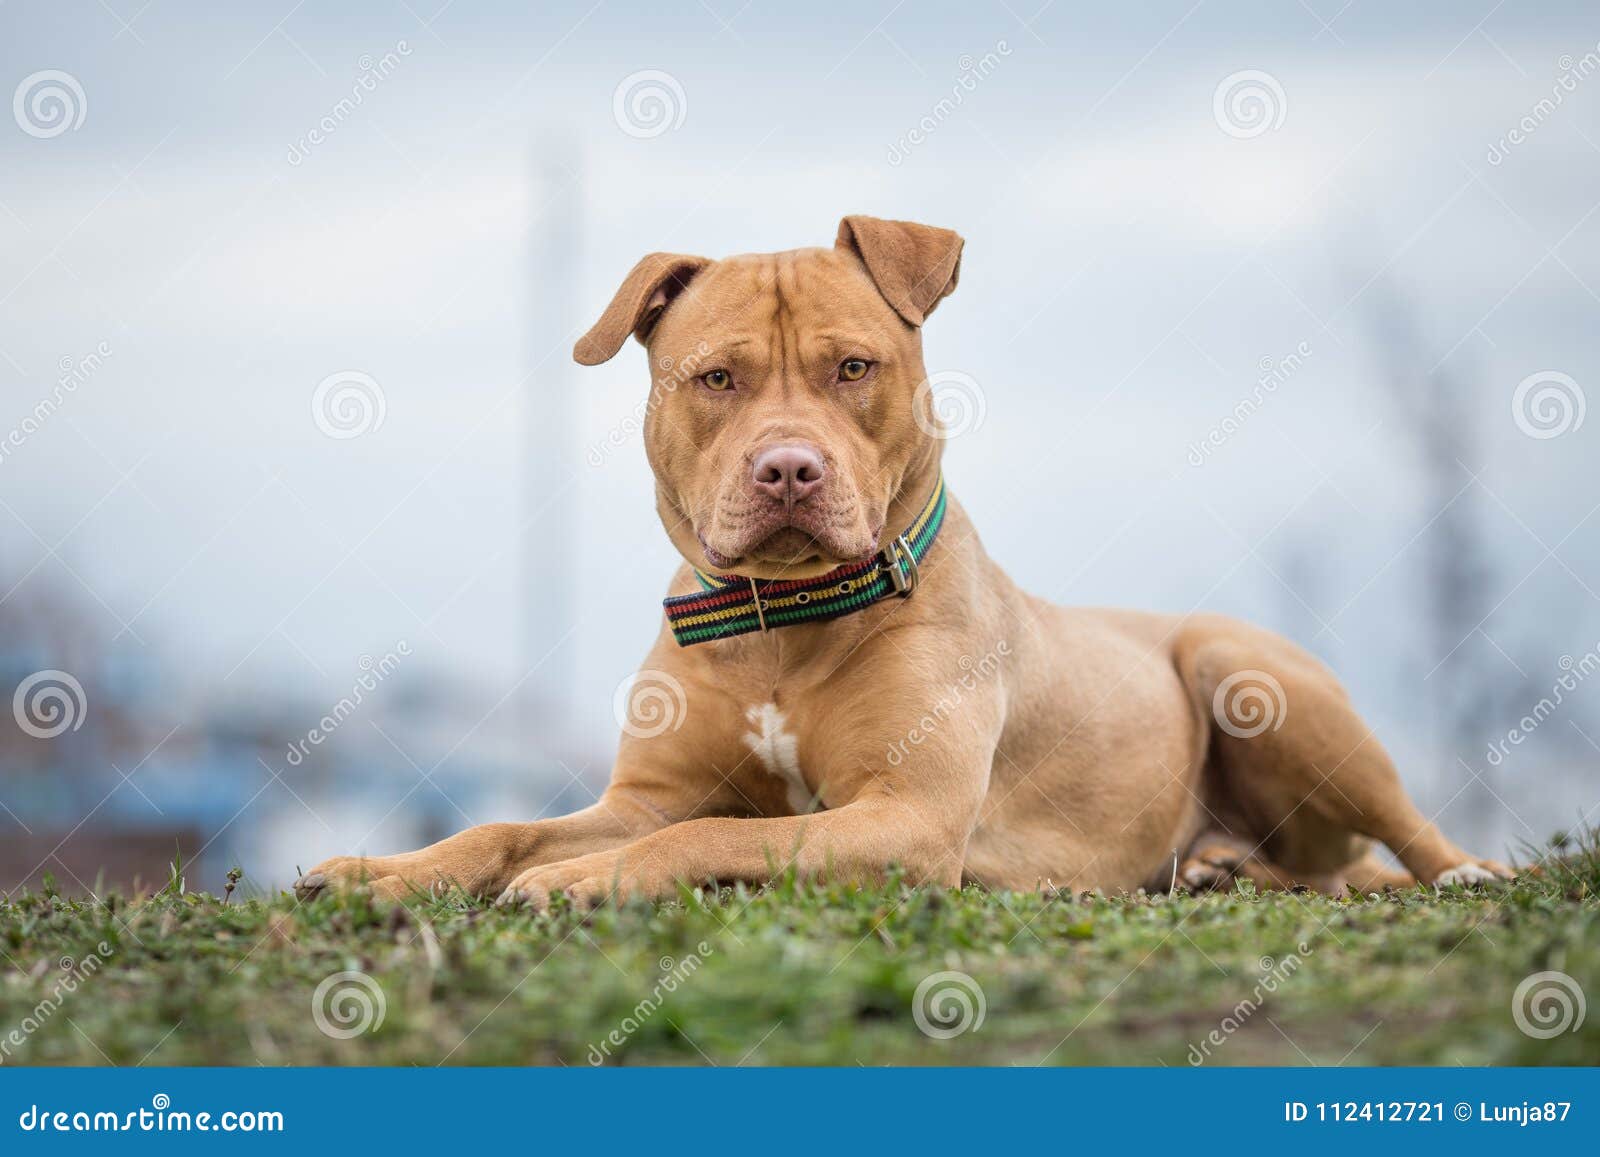 yellow pit bull terrier dog lying on grass